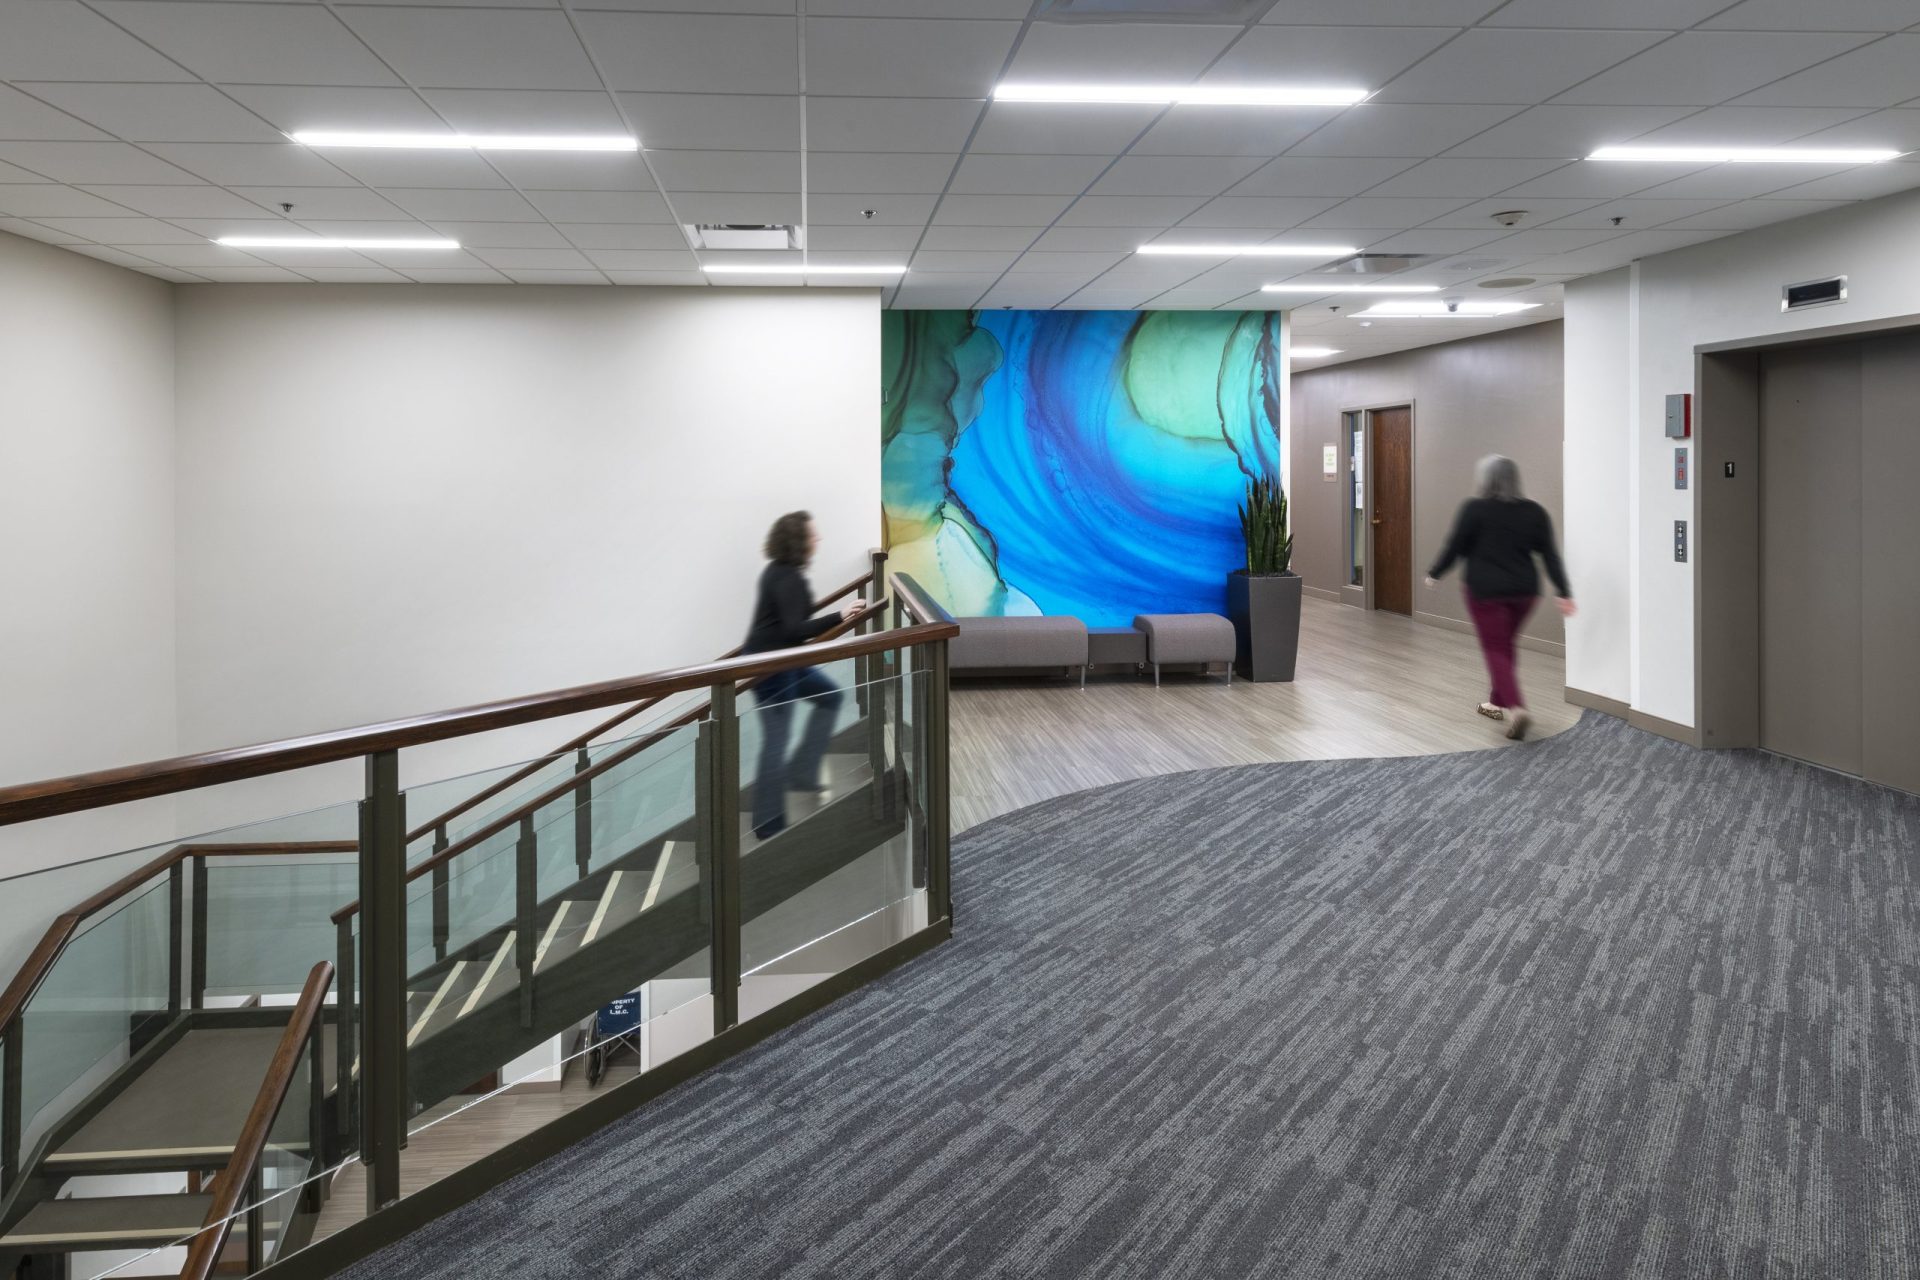 Design considerations for behavioral health patients